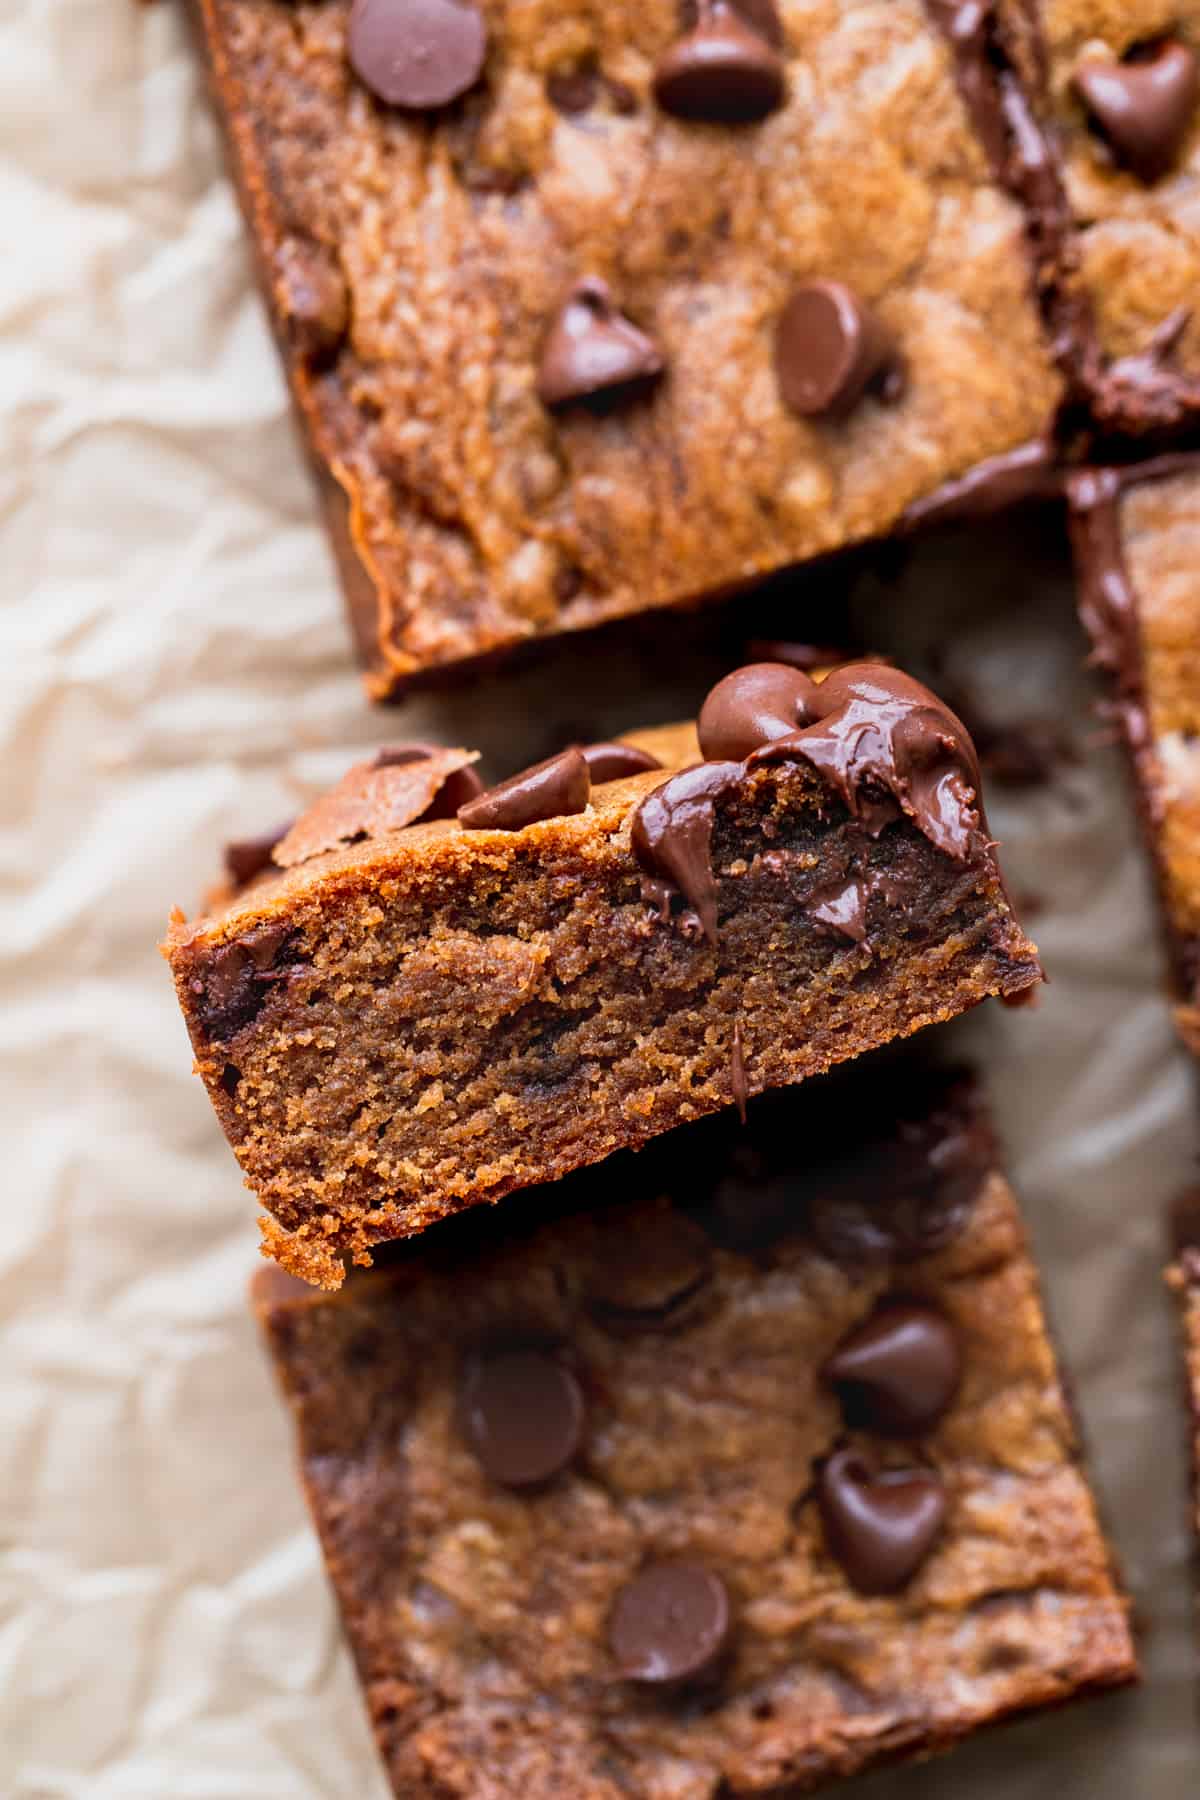 Gingerbread chocolate chip blondie on its side.